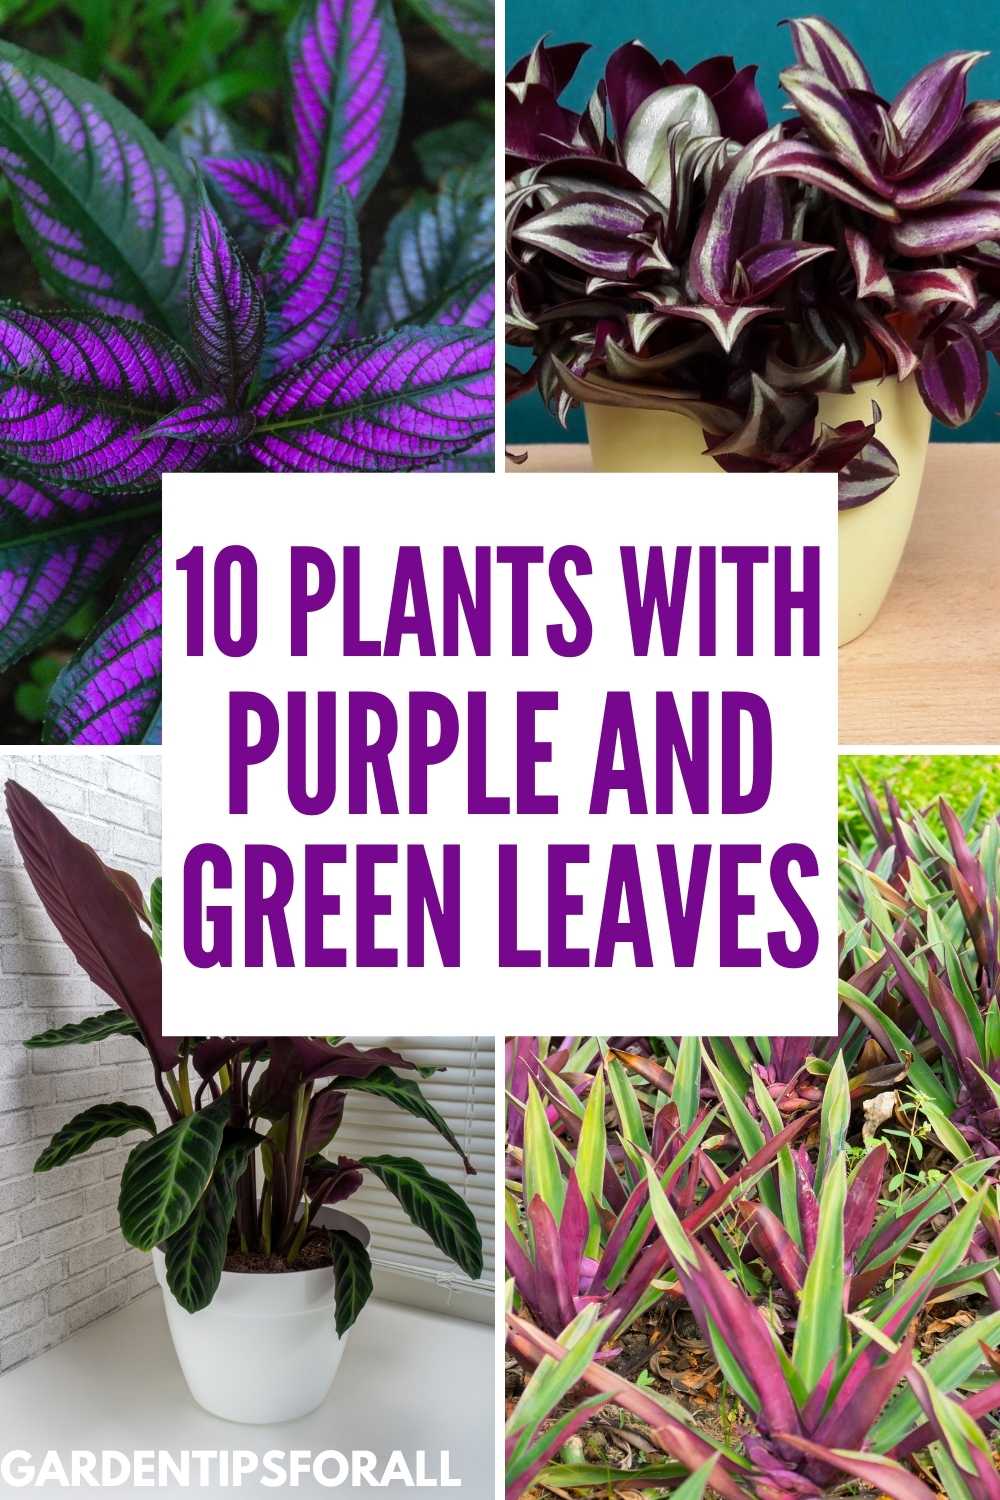 10 Plants with Green and Purple Leaves